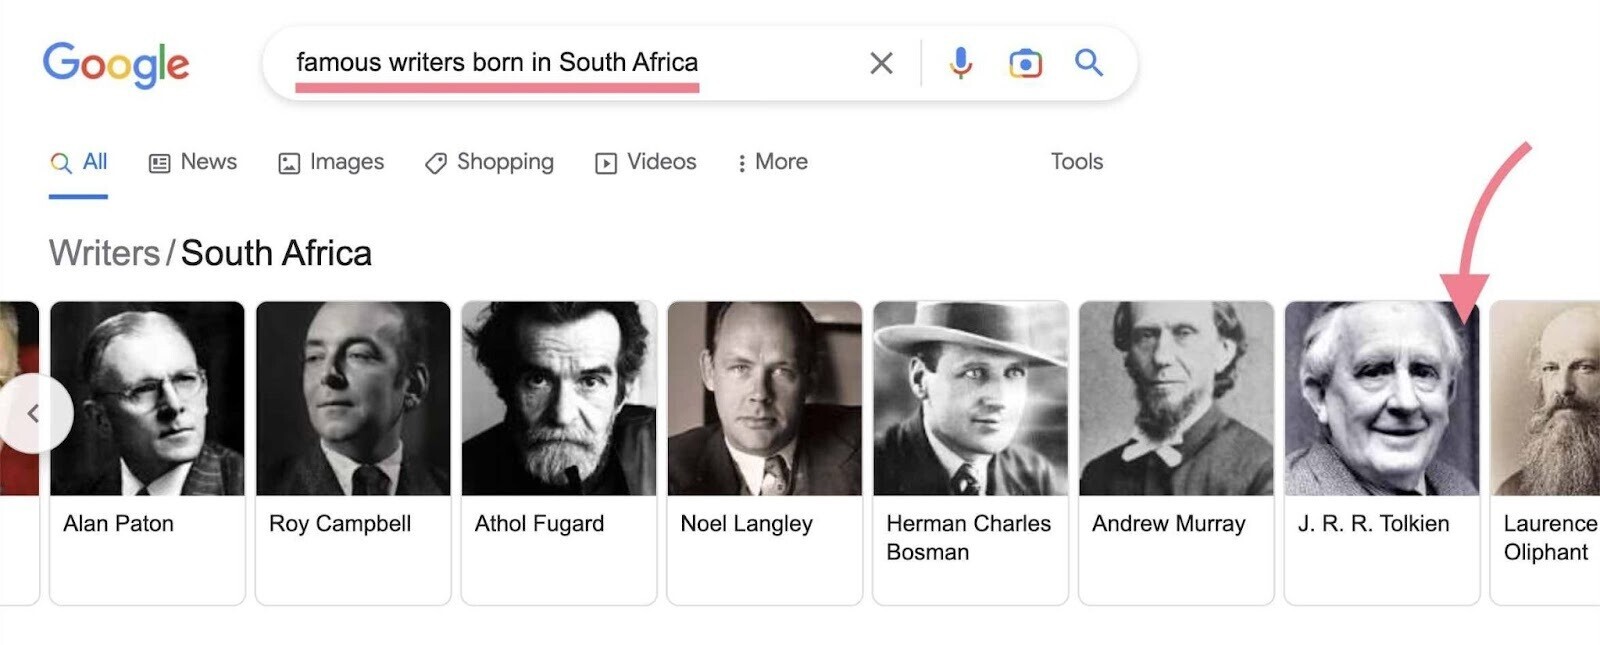 famous writers born in South Africa query